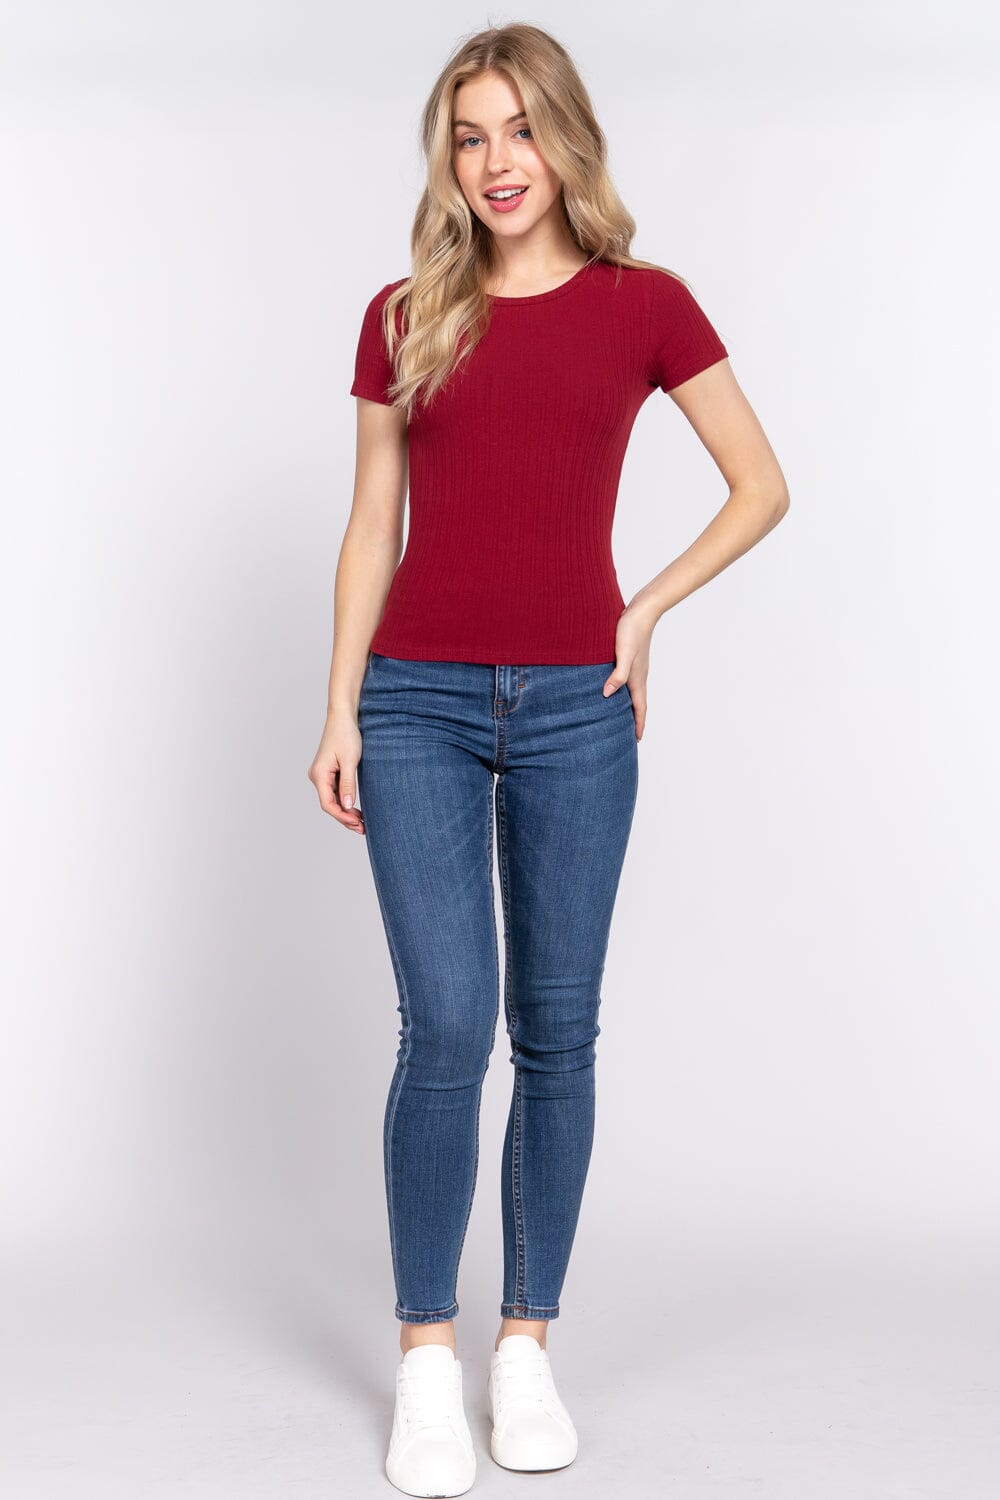 Wine Red Basic Casual Short Sleeve Crew Neck Variegated Rib Knit Top Shirts & Tops jehouze S 